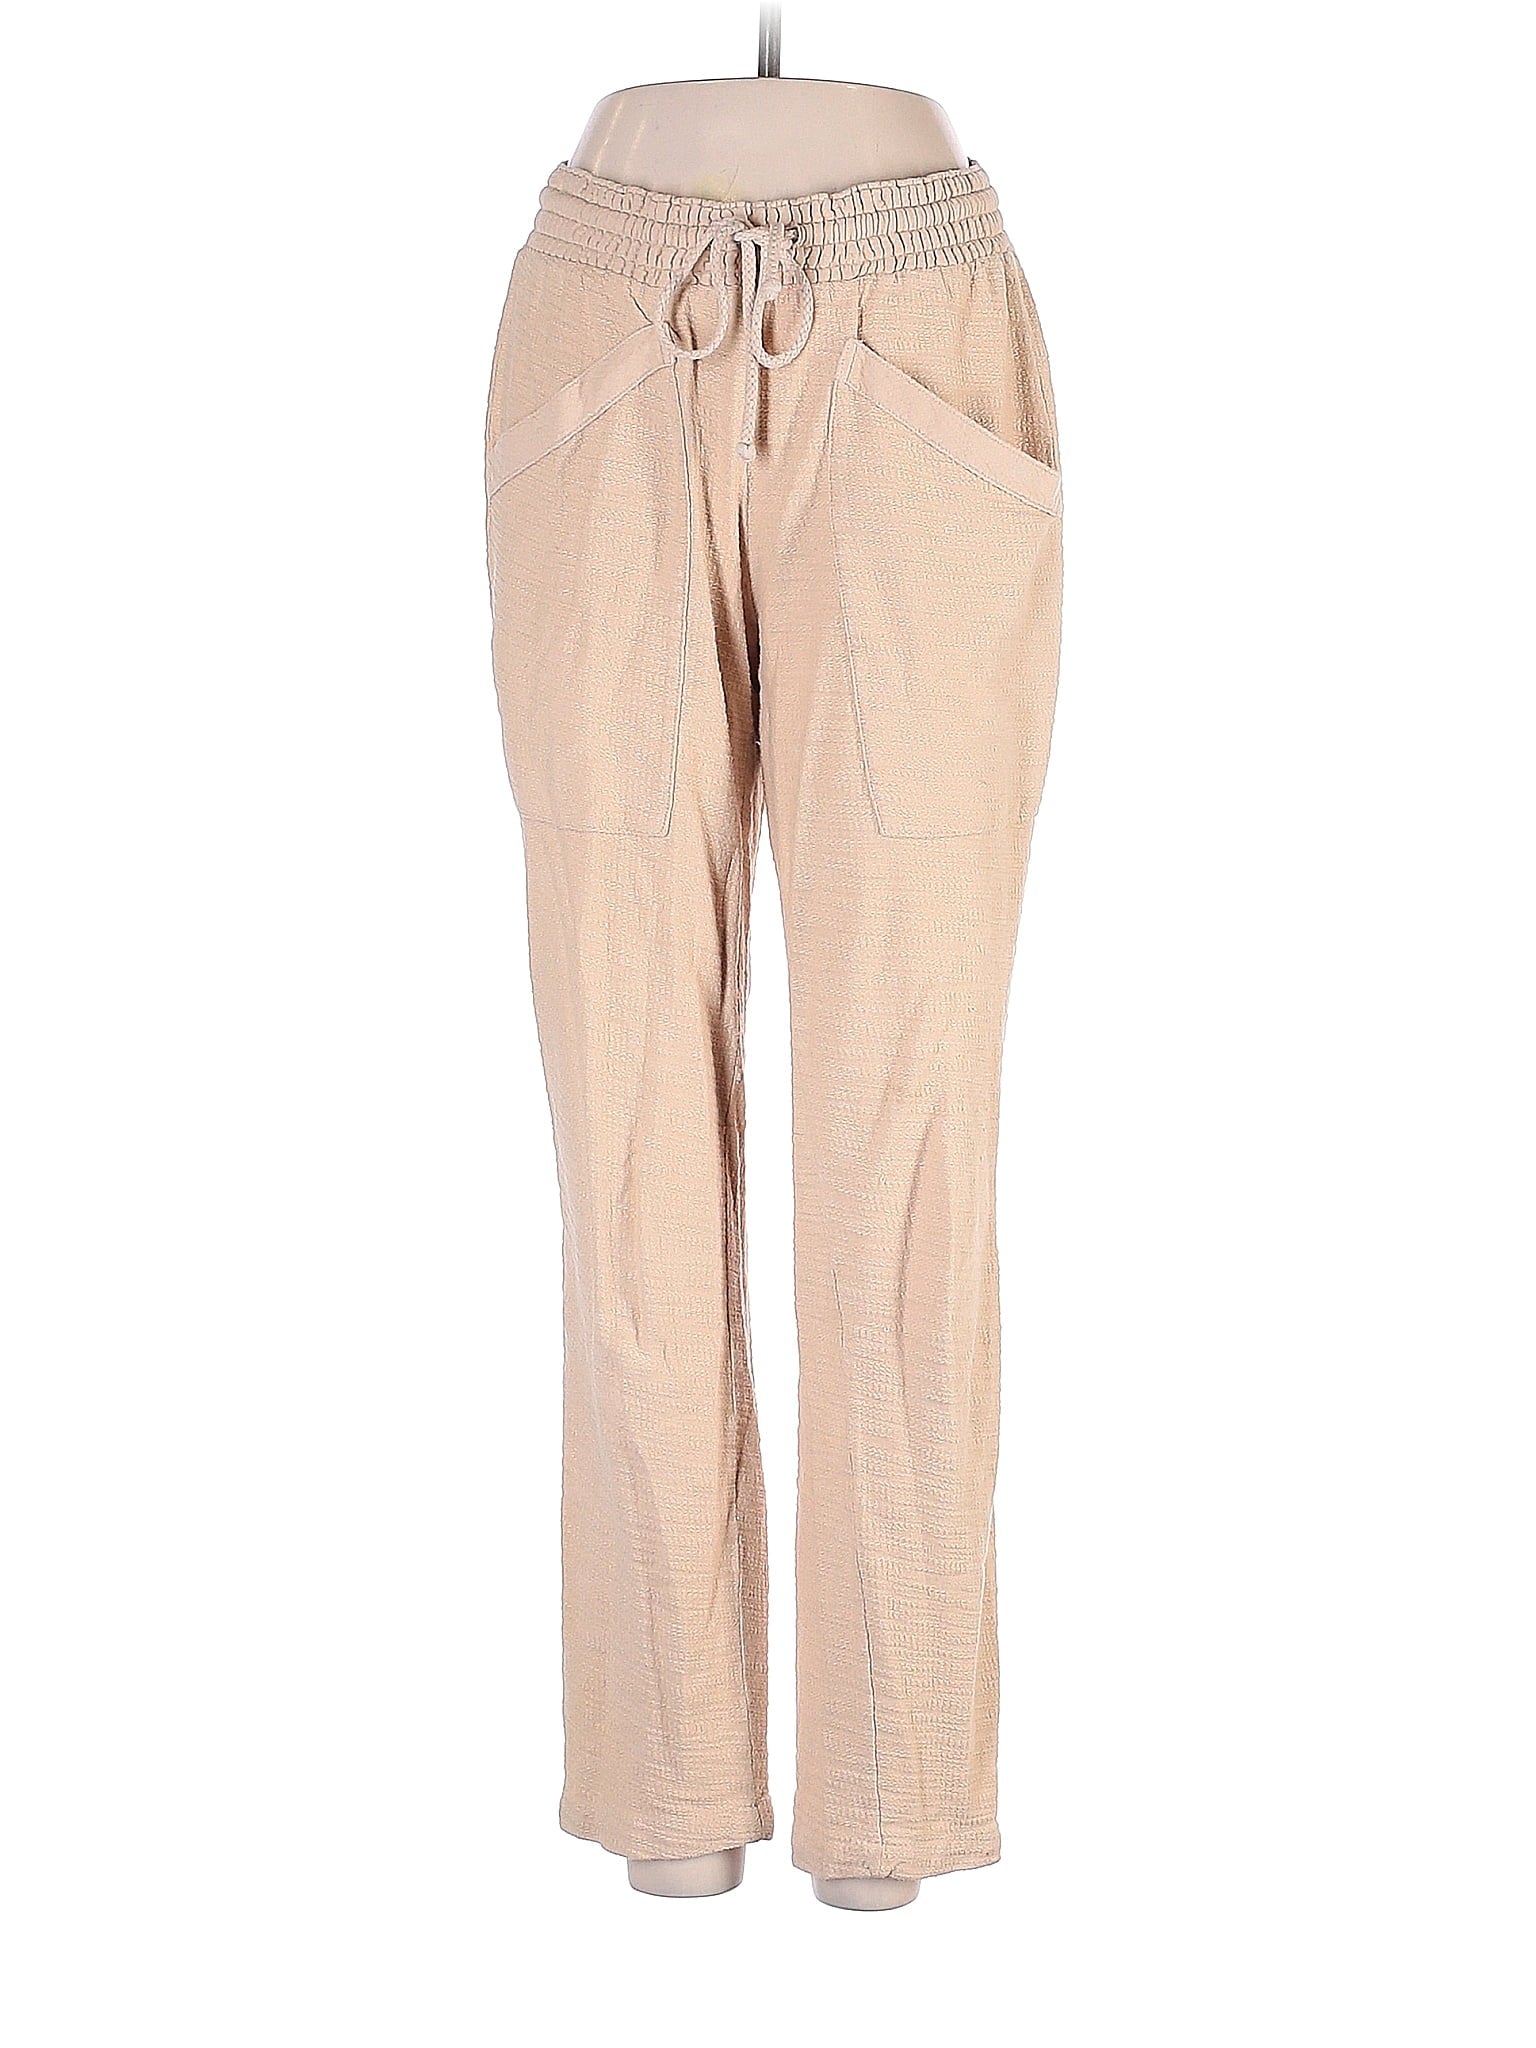 Casual Pants size - XS